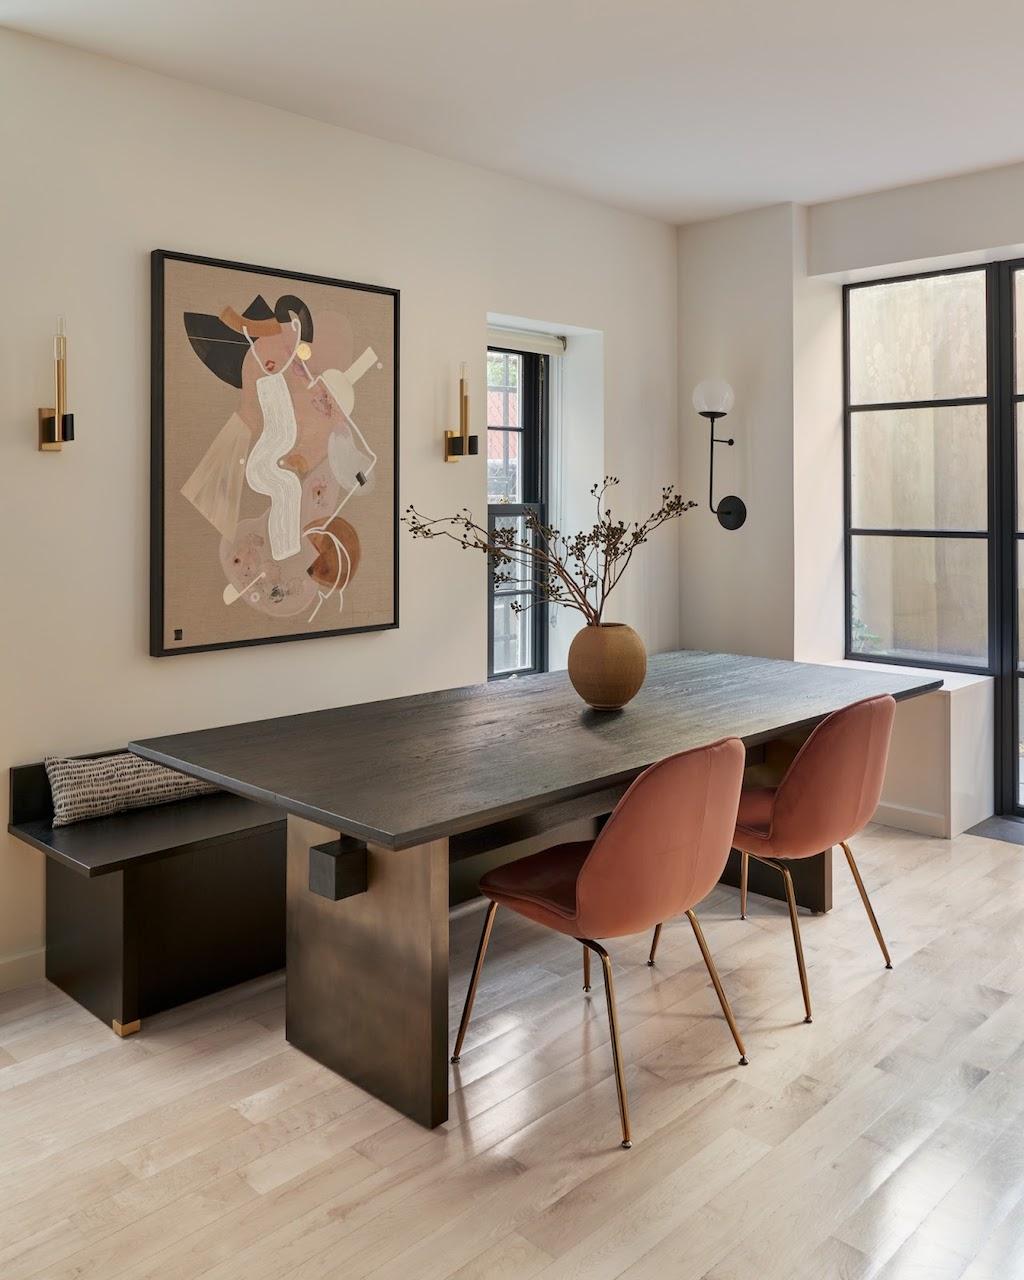 Behind this effortlessly chic home is a sophisticated woman who leads a successful career 